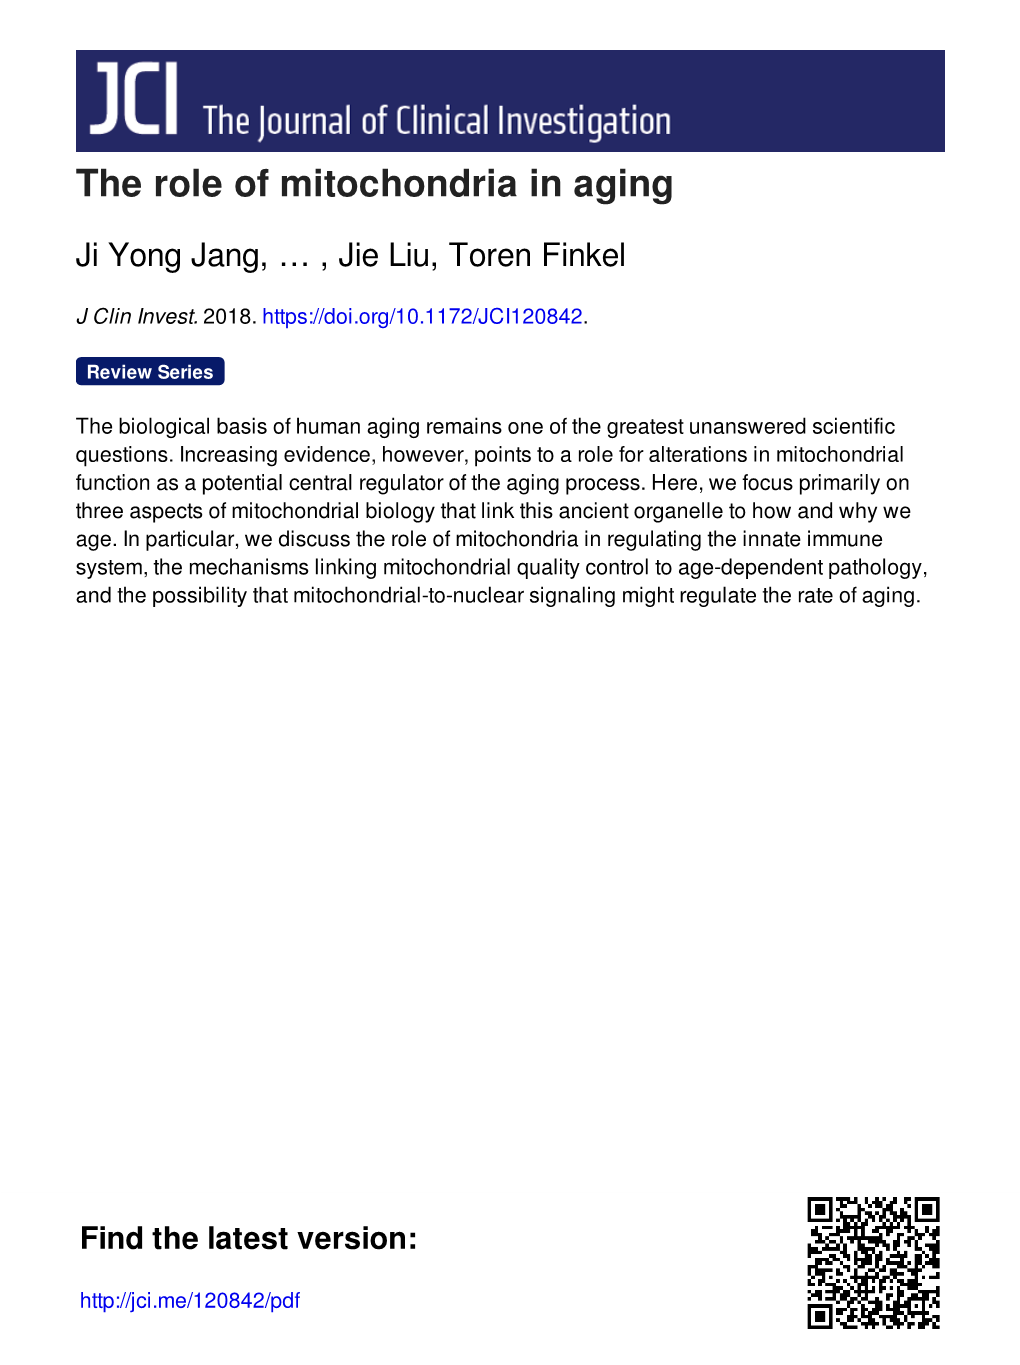 The Role of Mitochondria in Aging